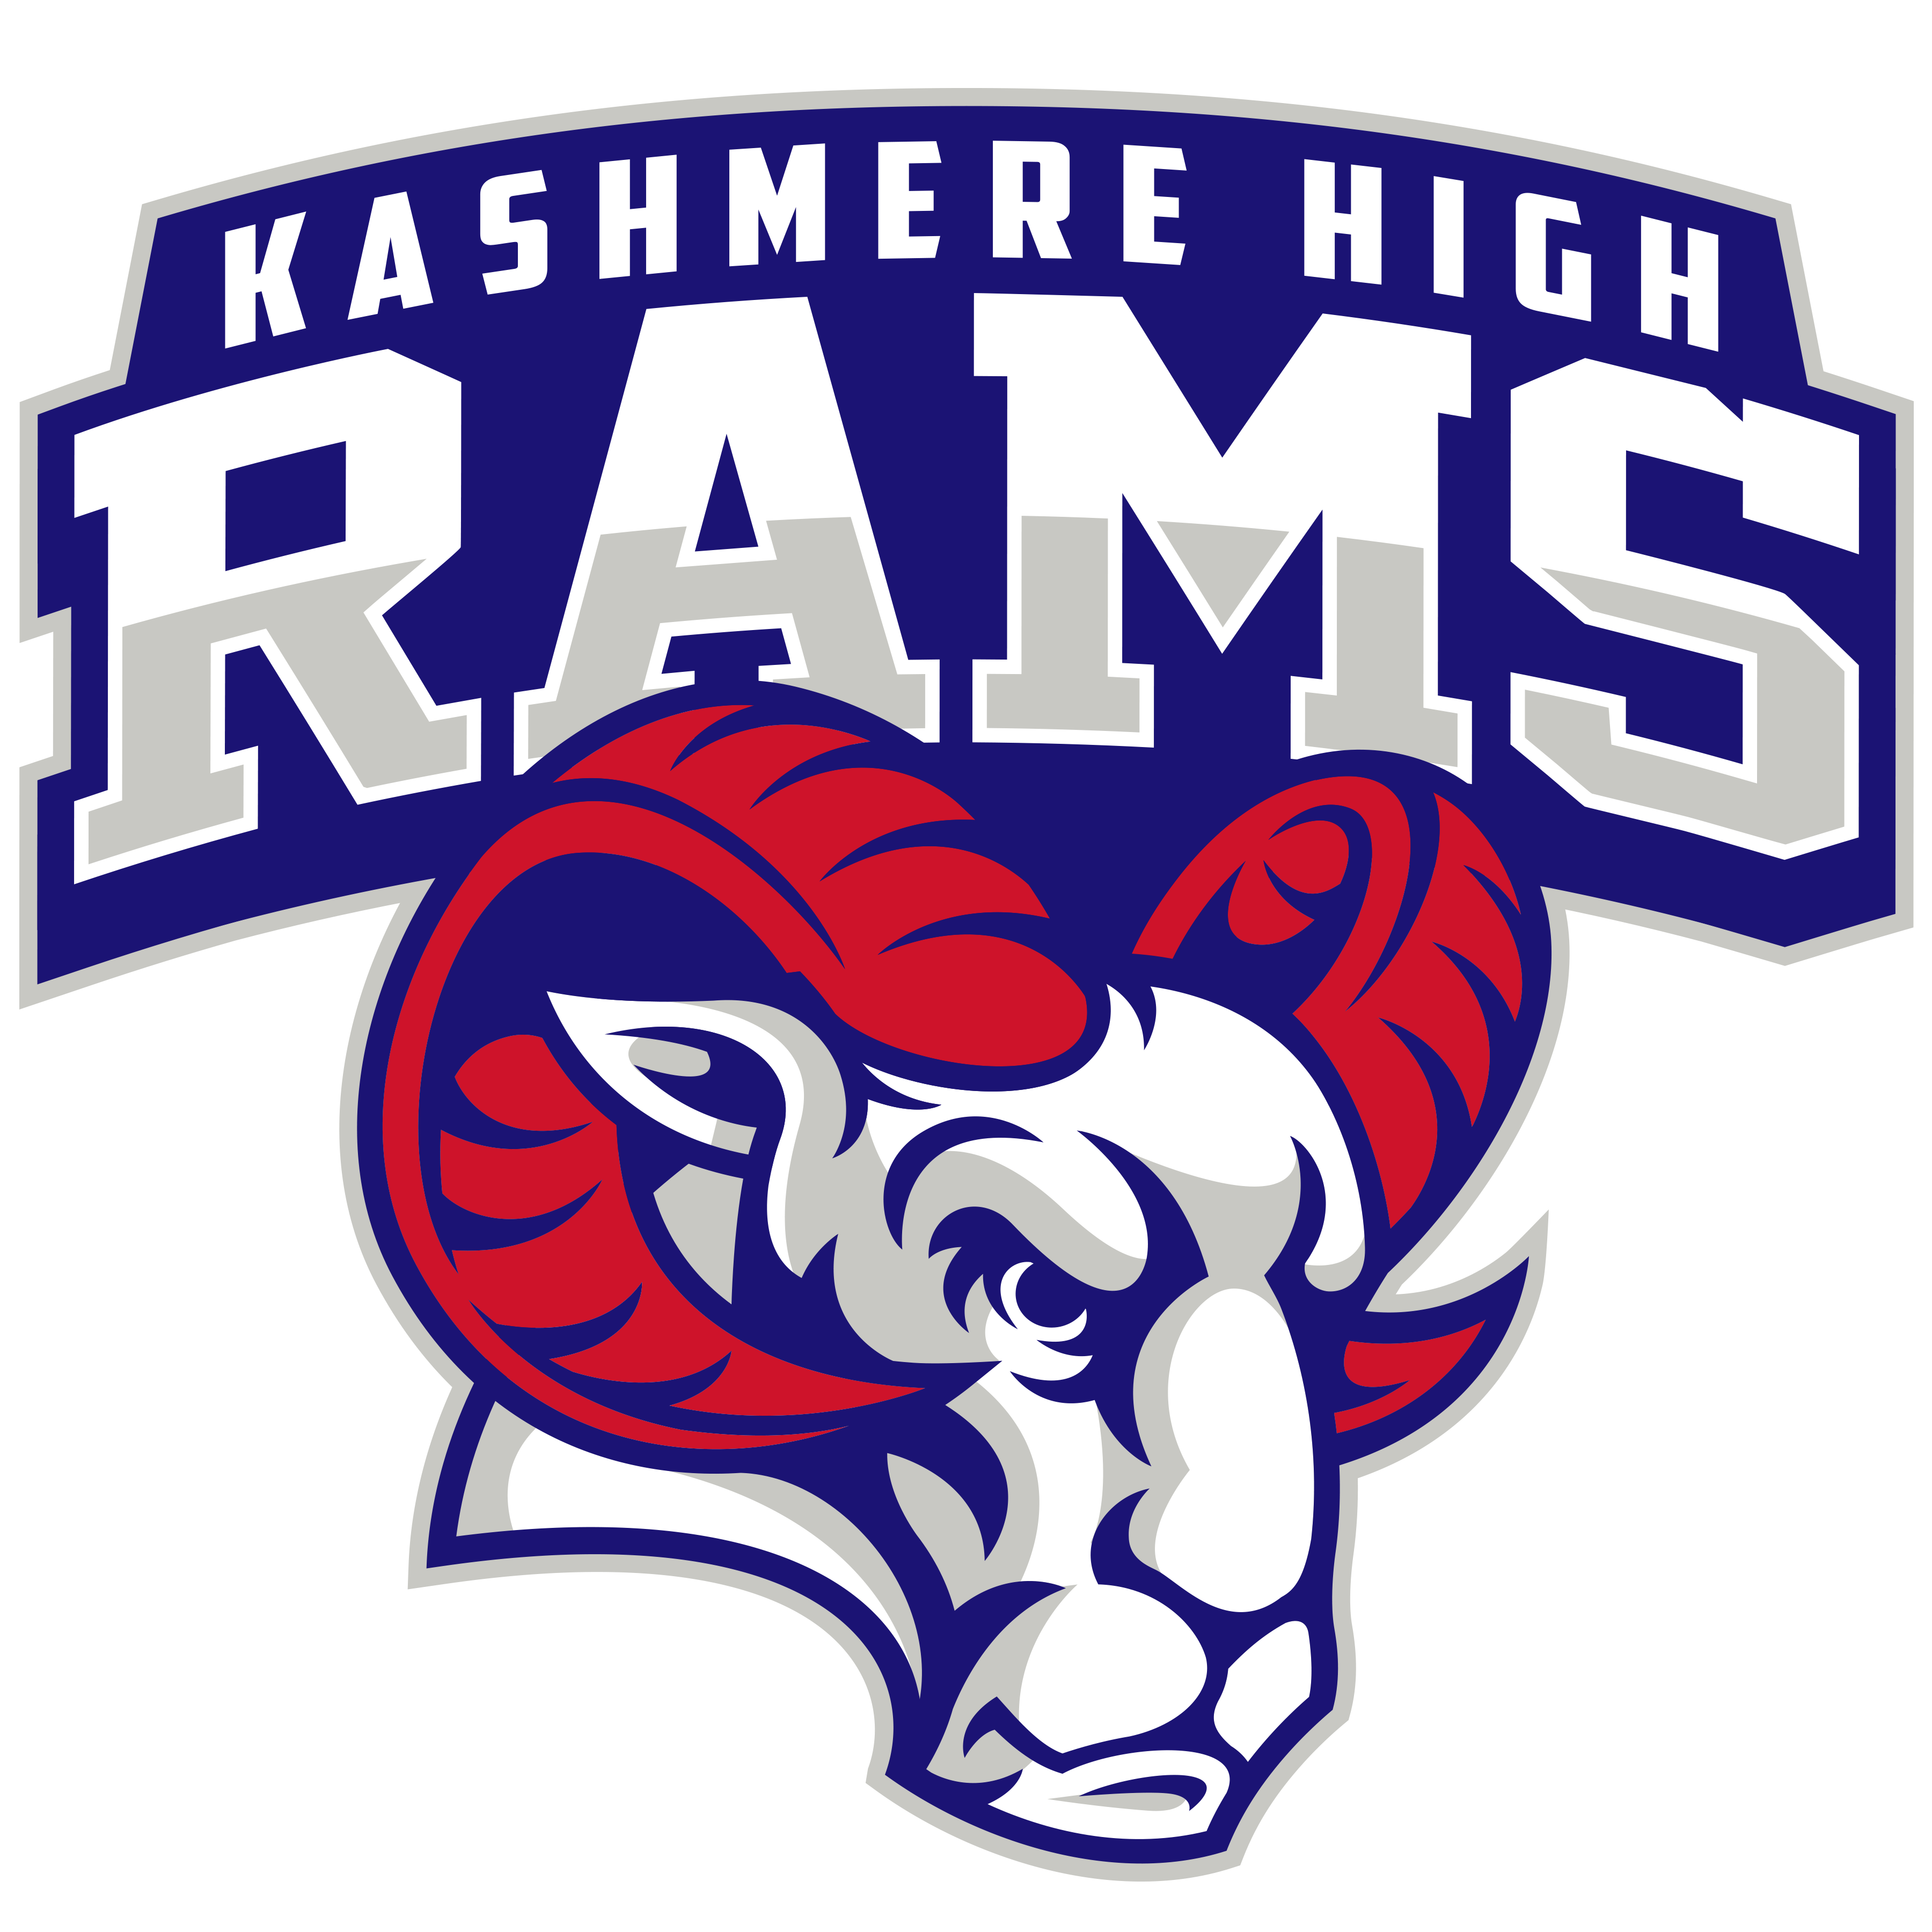 Kashmere High Logo logo design by logo designer The Robot Agency for your inspiration and for the worlds largest logo competition